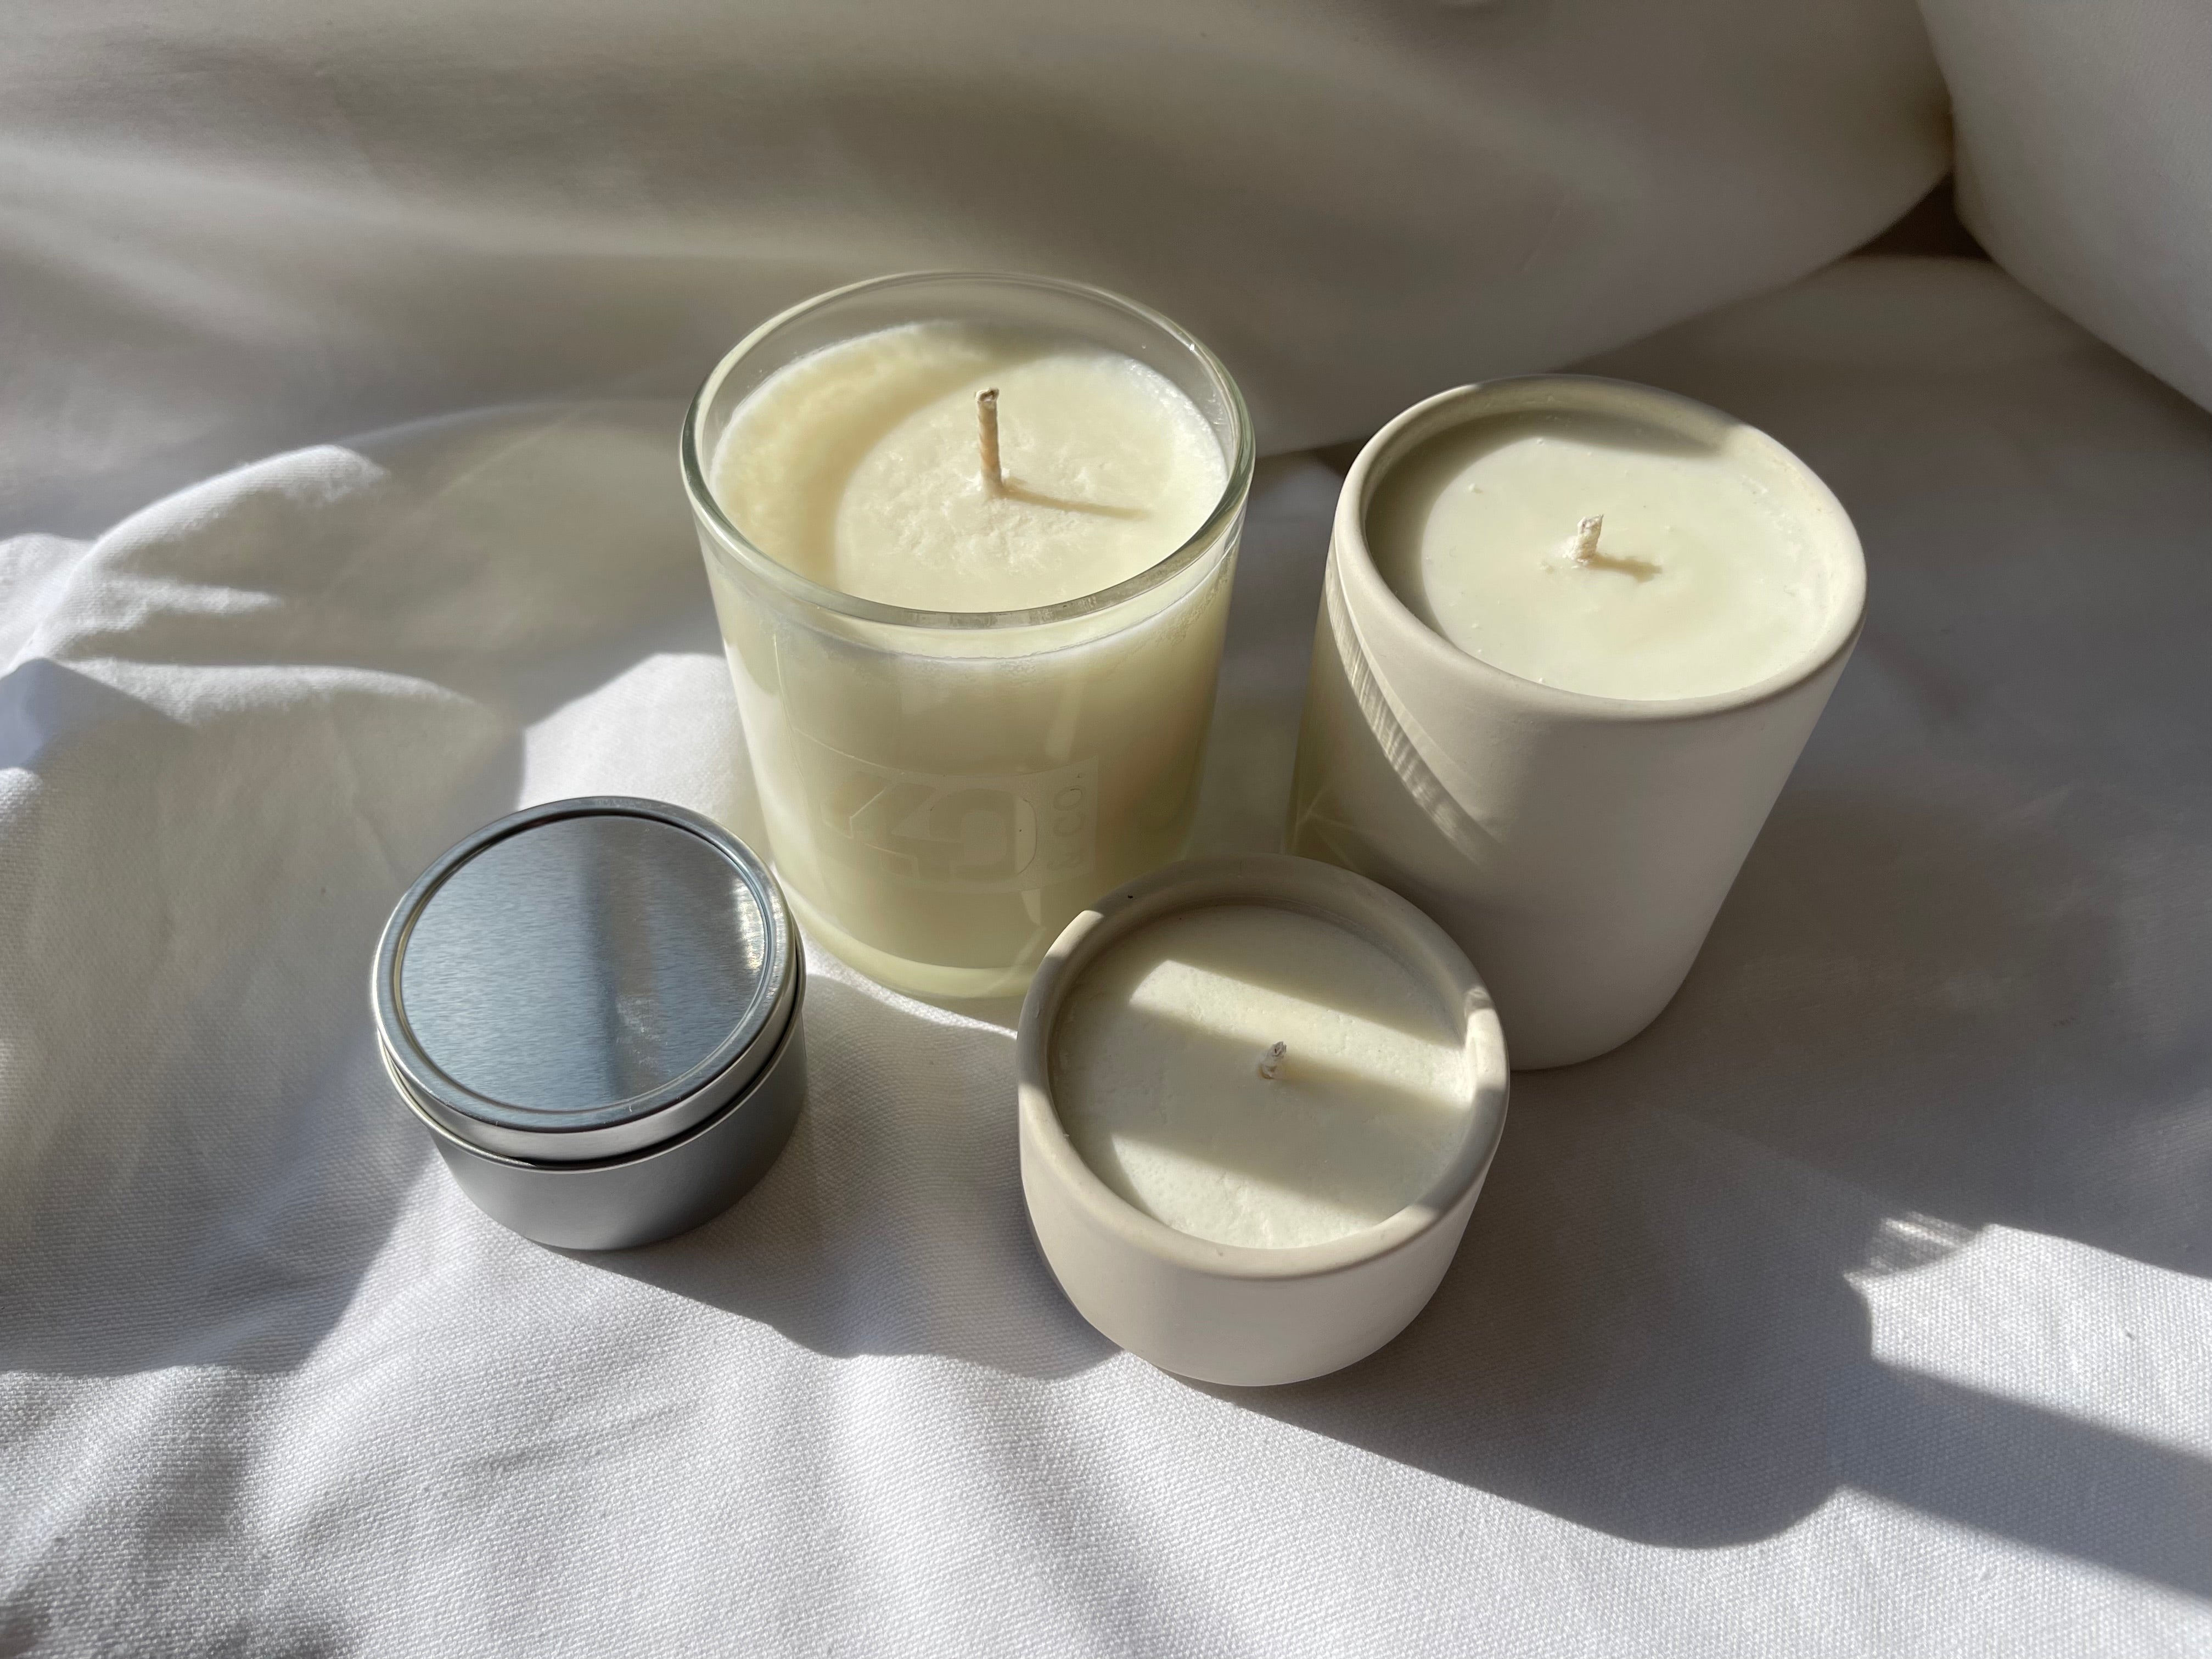 downtown tucson candle | multiple options